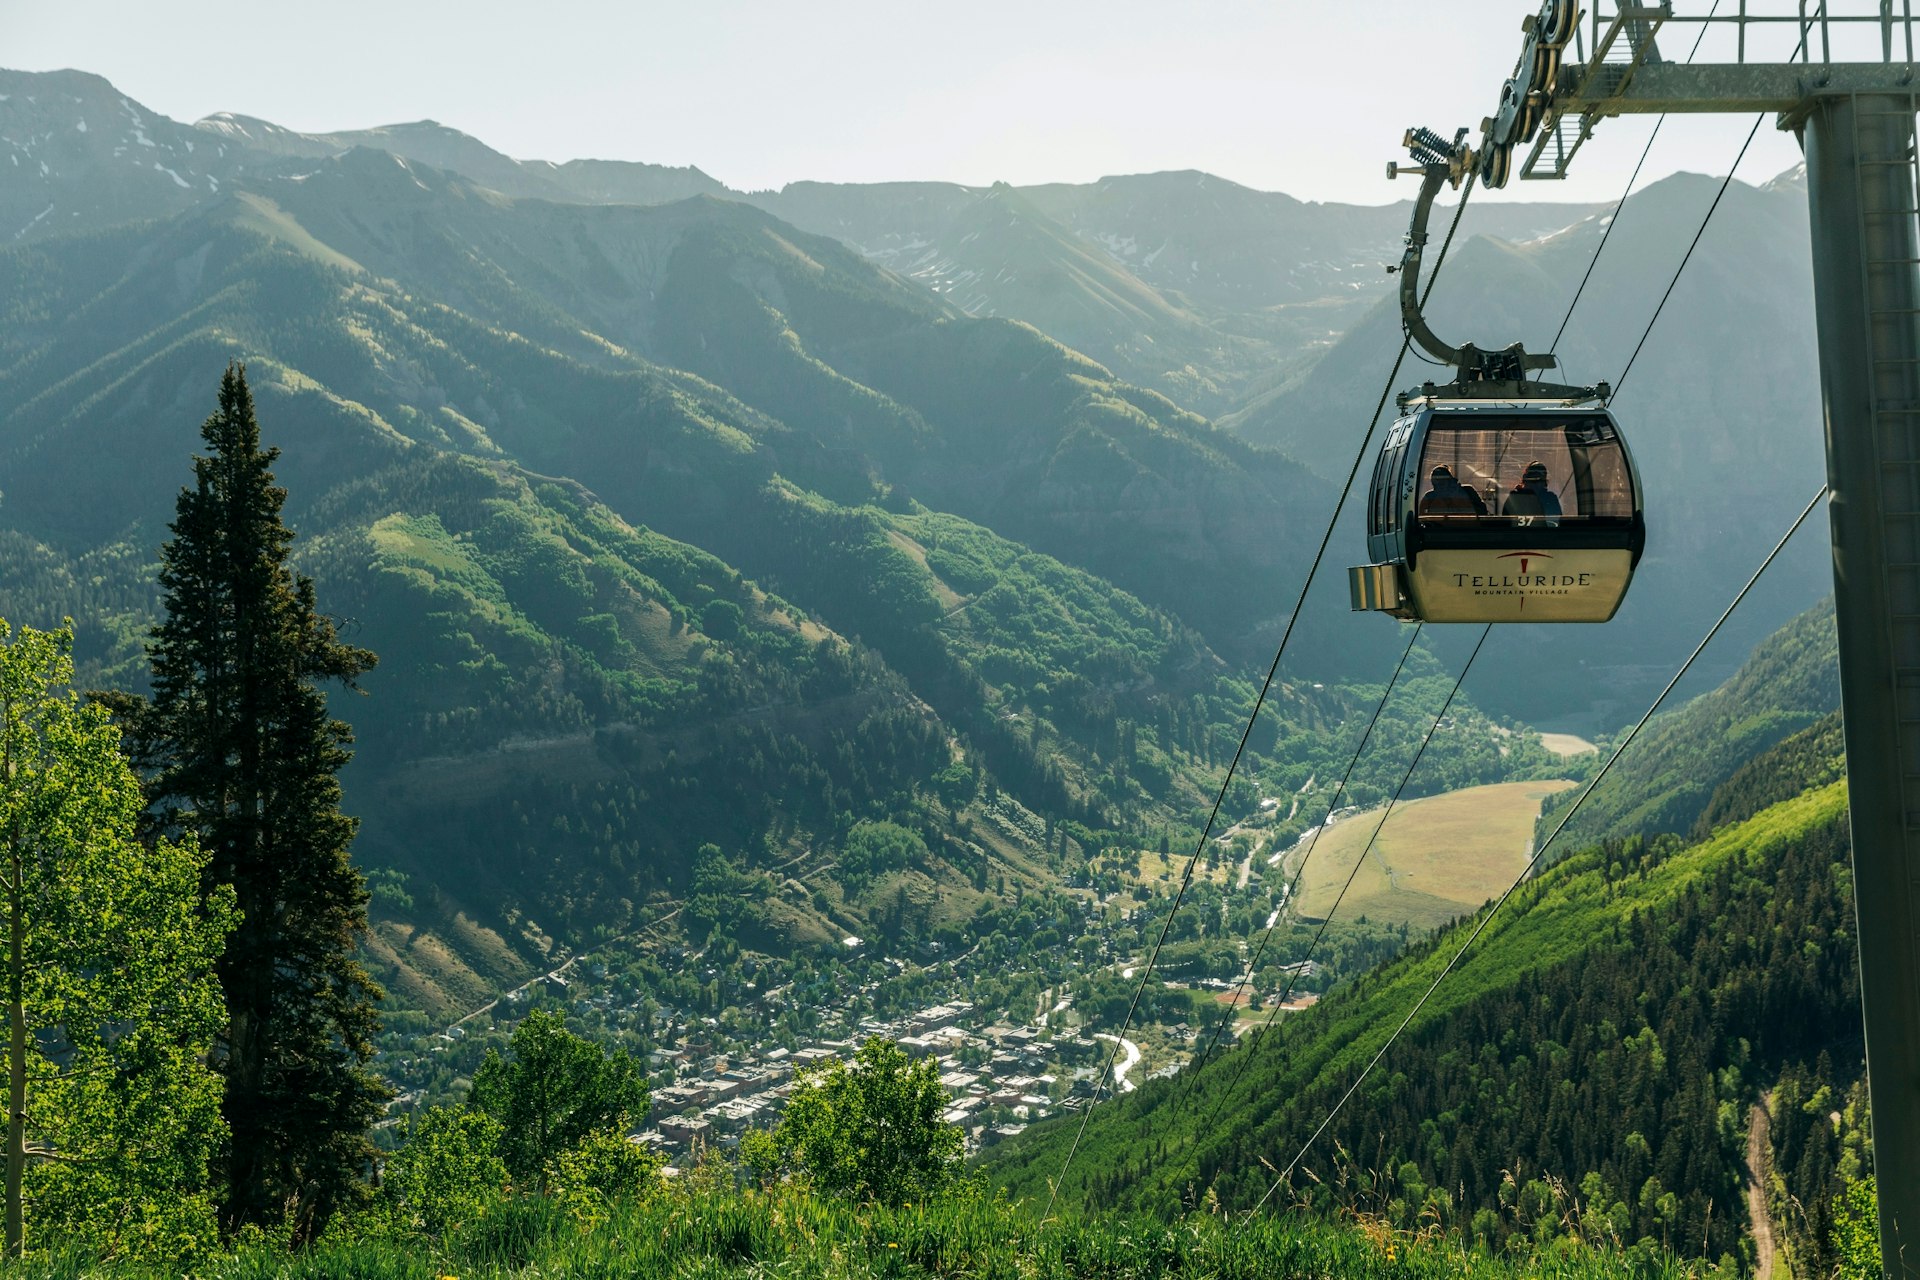 A gondola ascending from Telluride